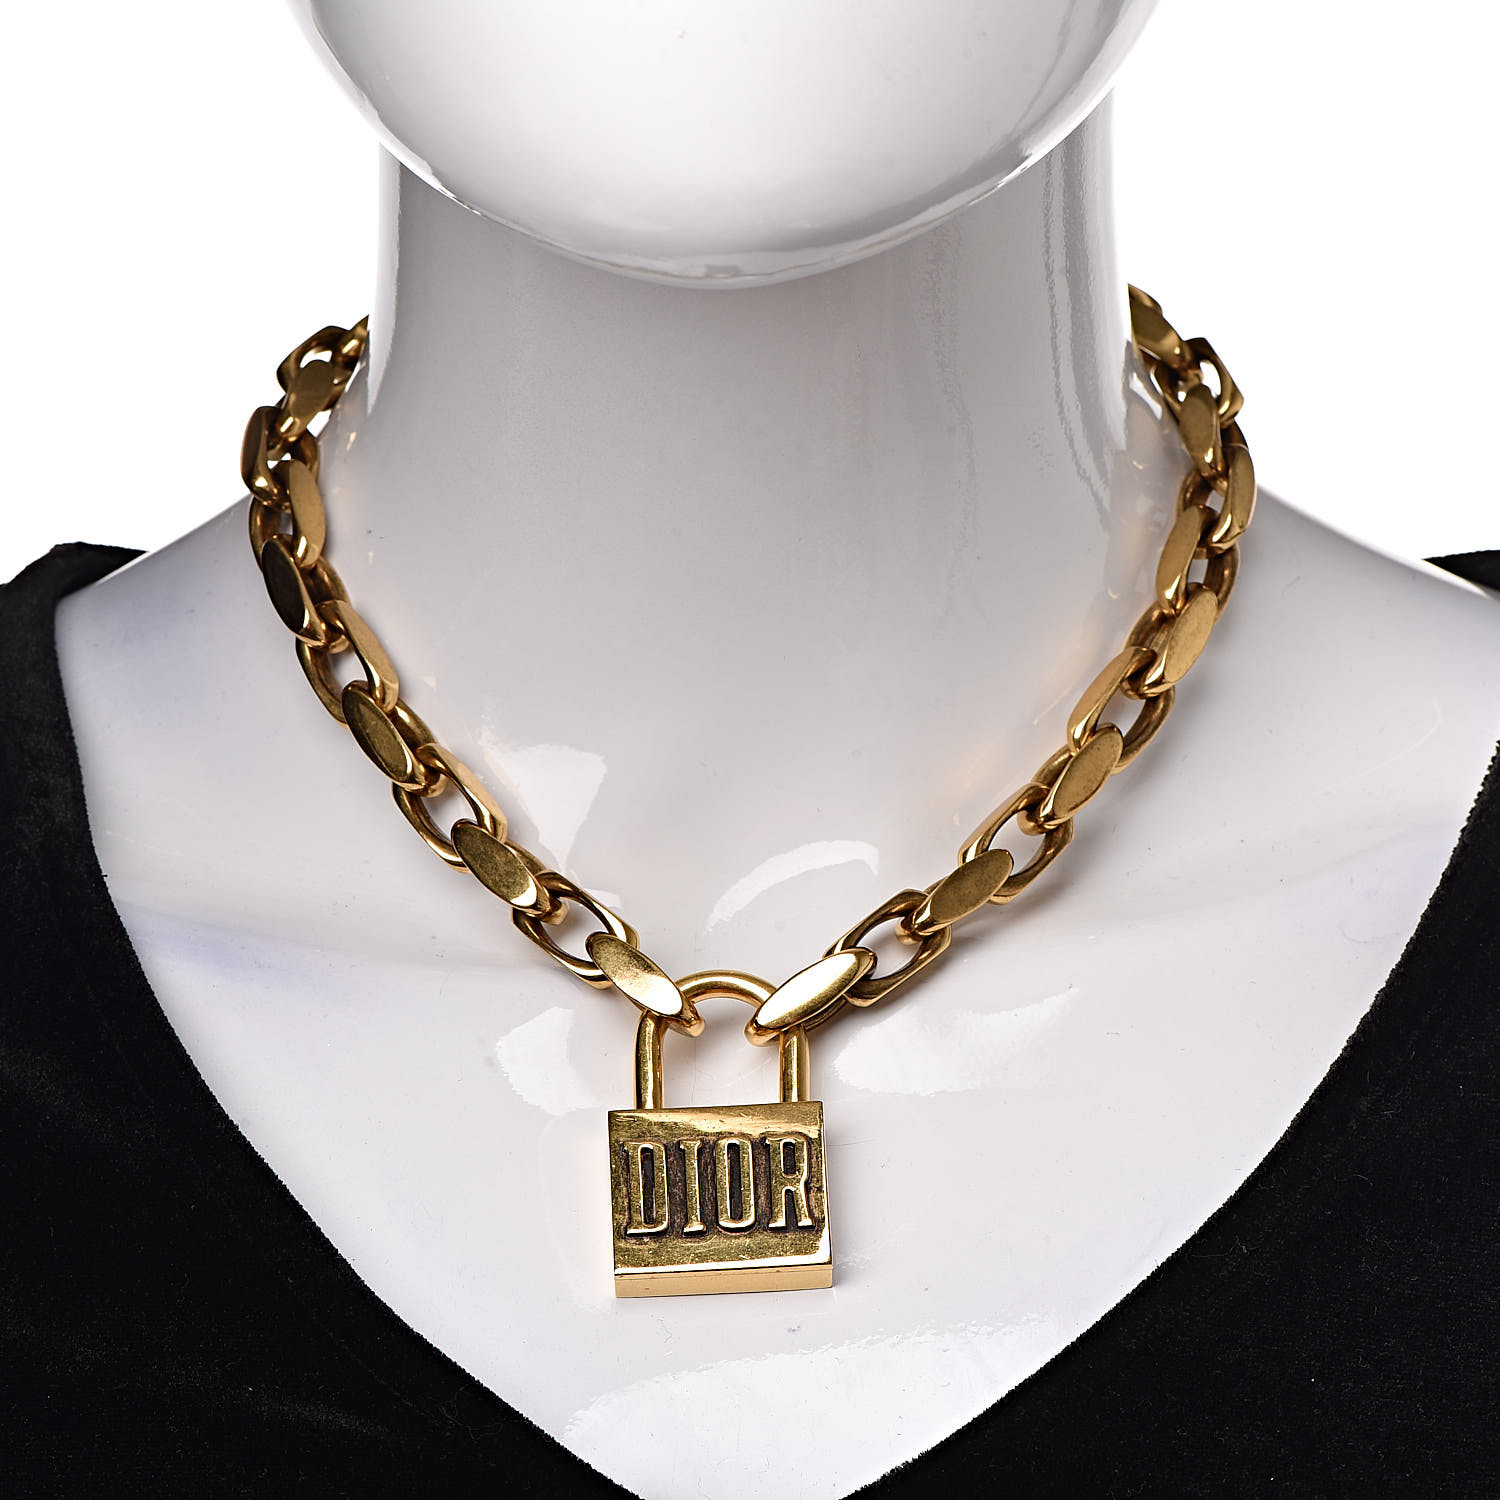 dior gold padlock necklace, OFF 70%,www 